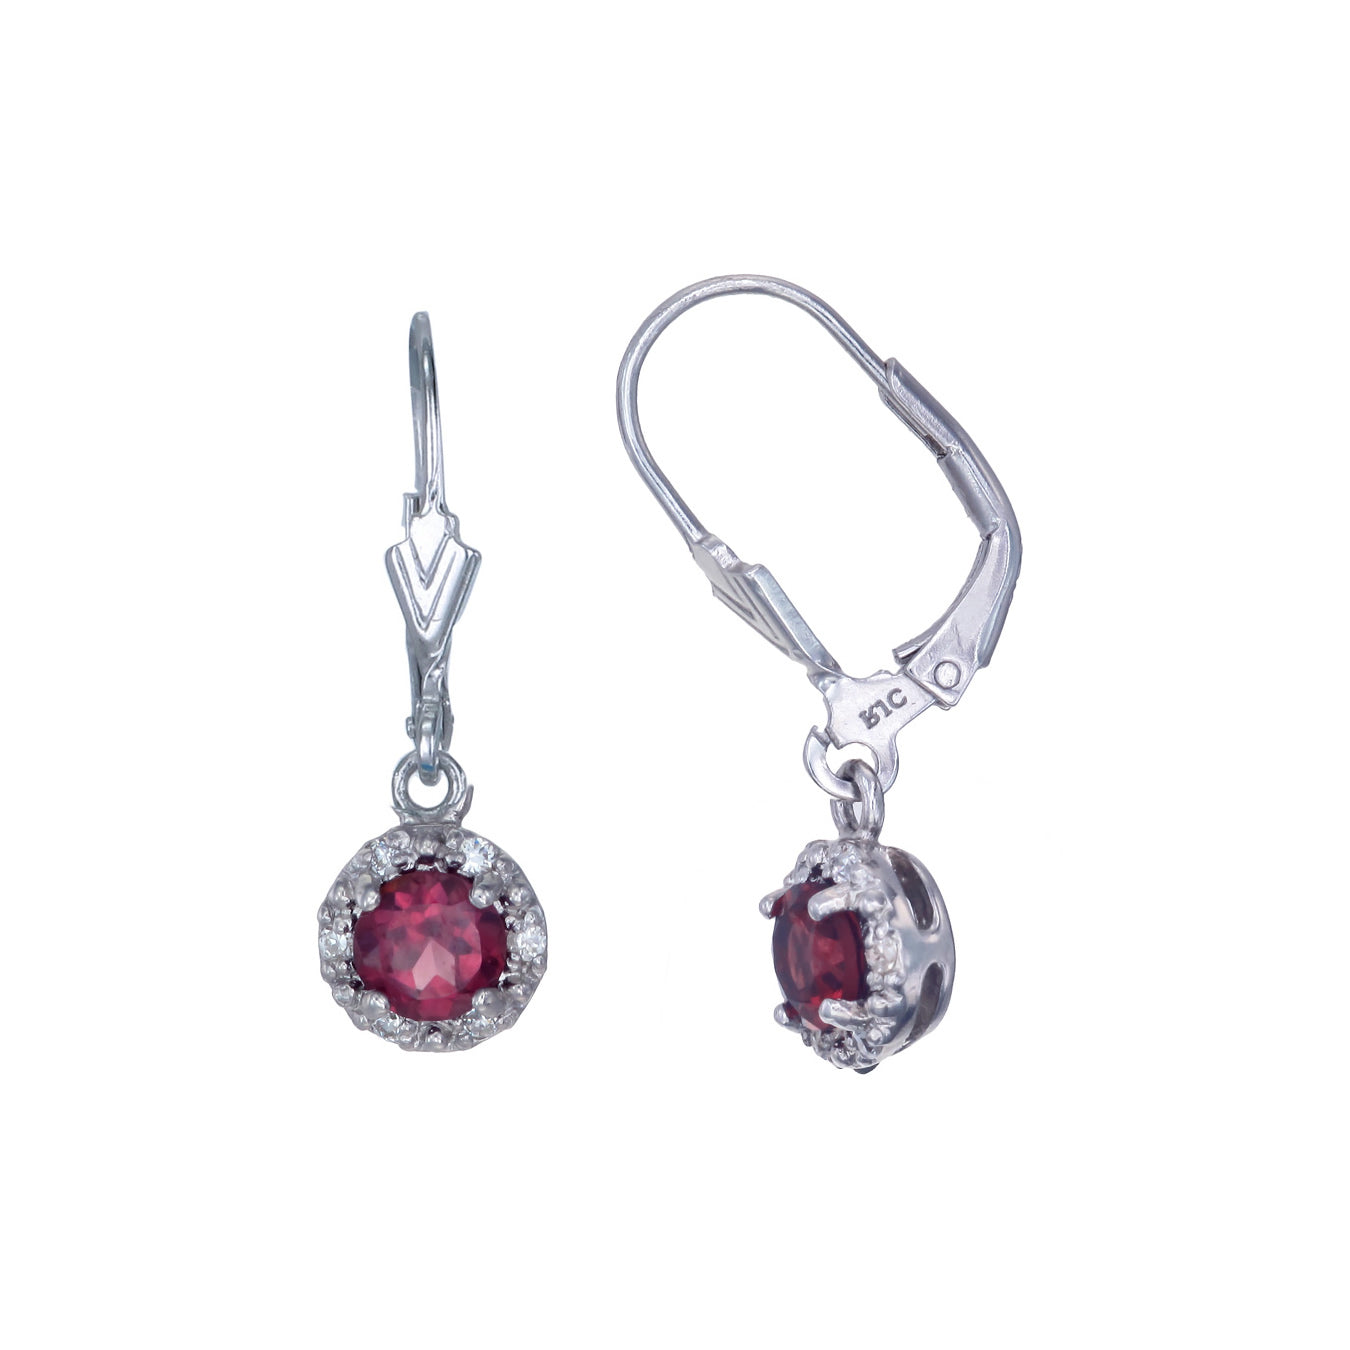 0.90 cttw Garnet Dangle Earrings .925 Sterling Silver With Rhodium 5 MM Round